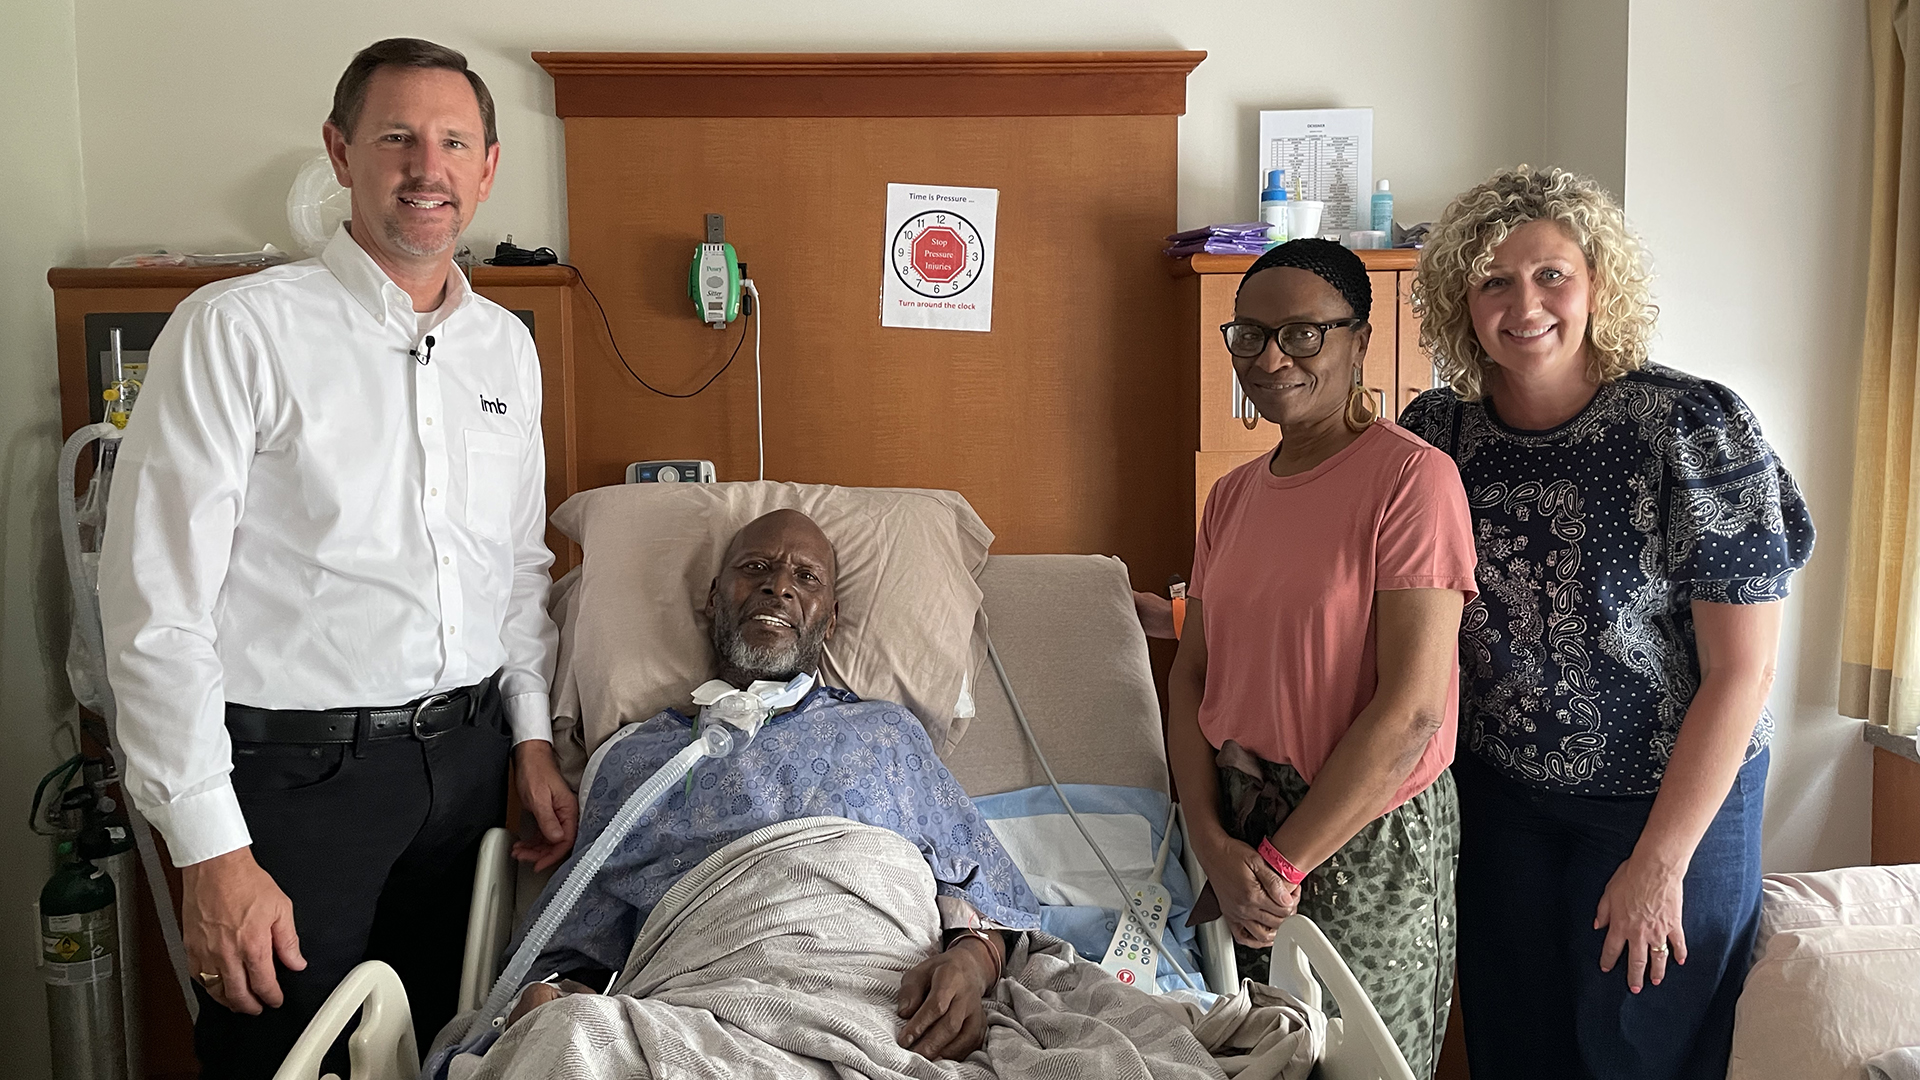 IMB President Paul Chitwood and his wife, Michelle, visit George Smith and his wife, Geraldine, in the hospital. George Smith contracted COVID while on the mission field in Uganda.